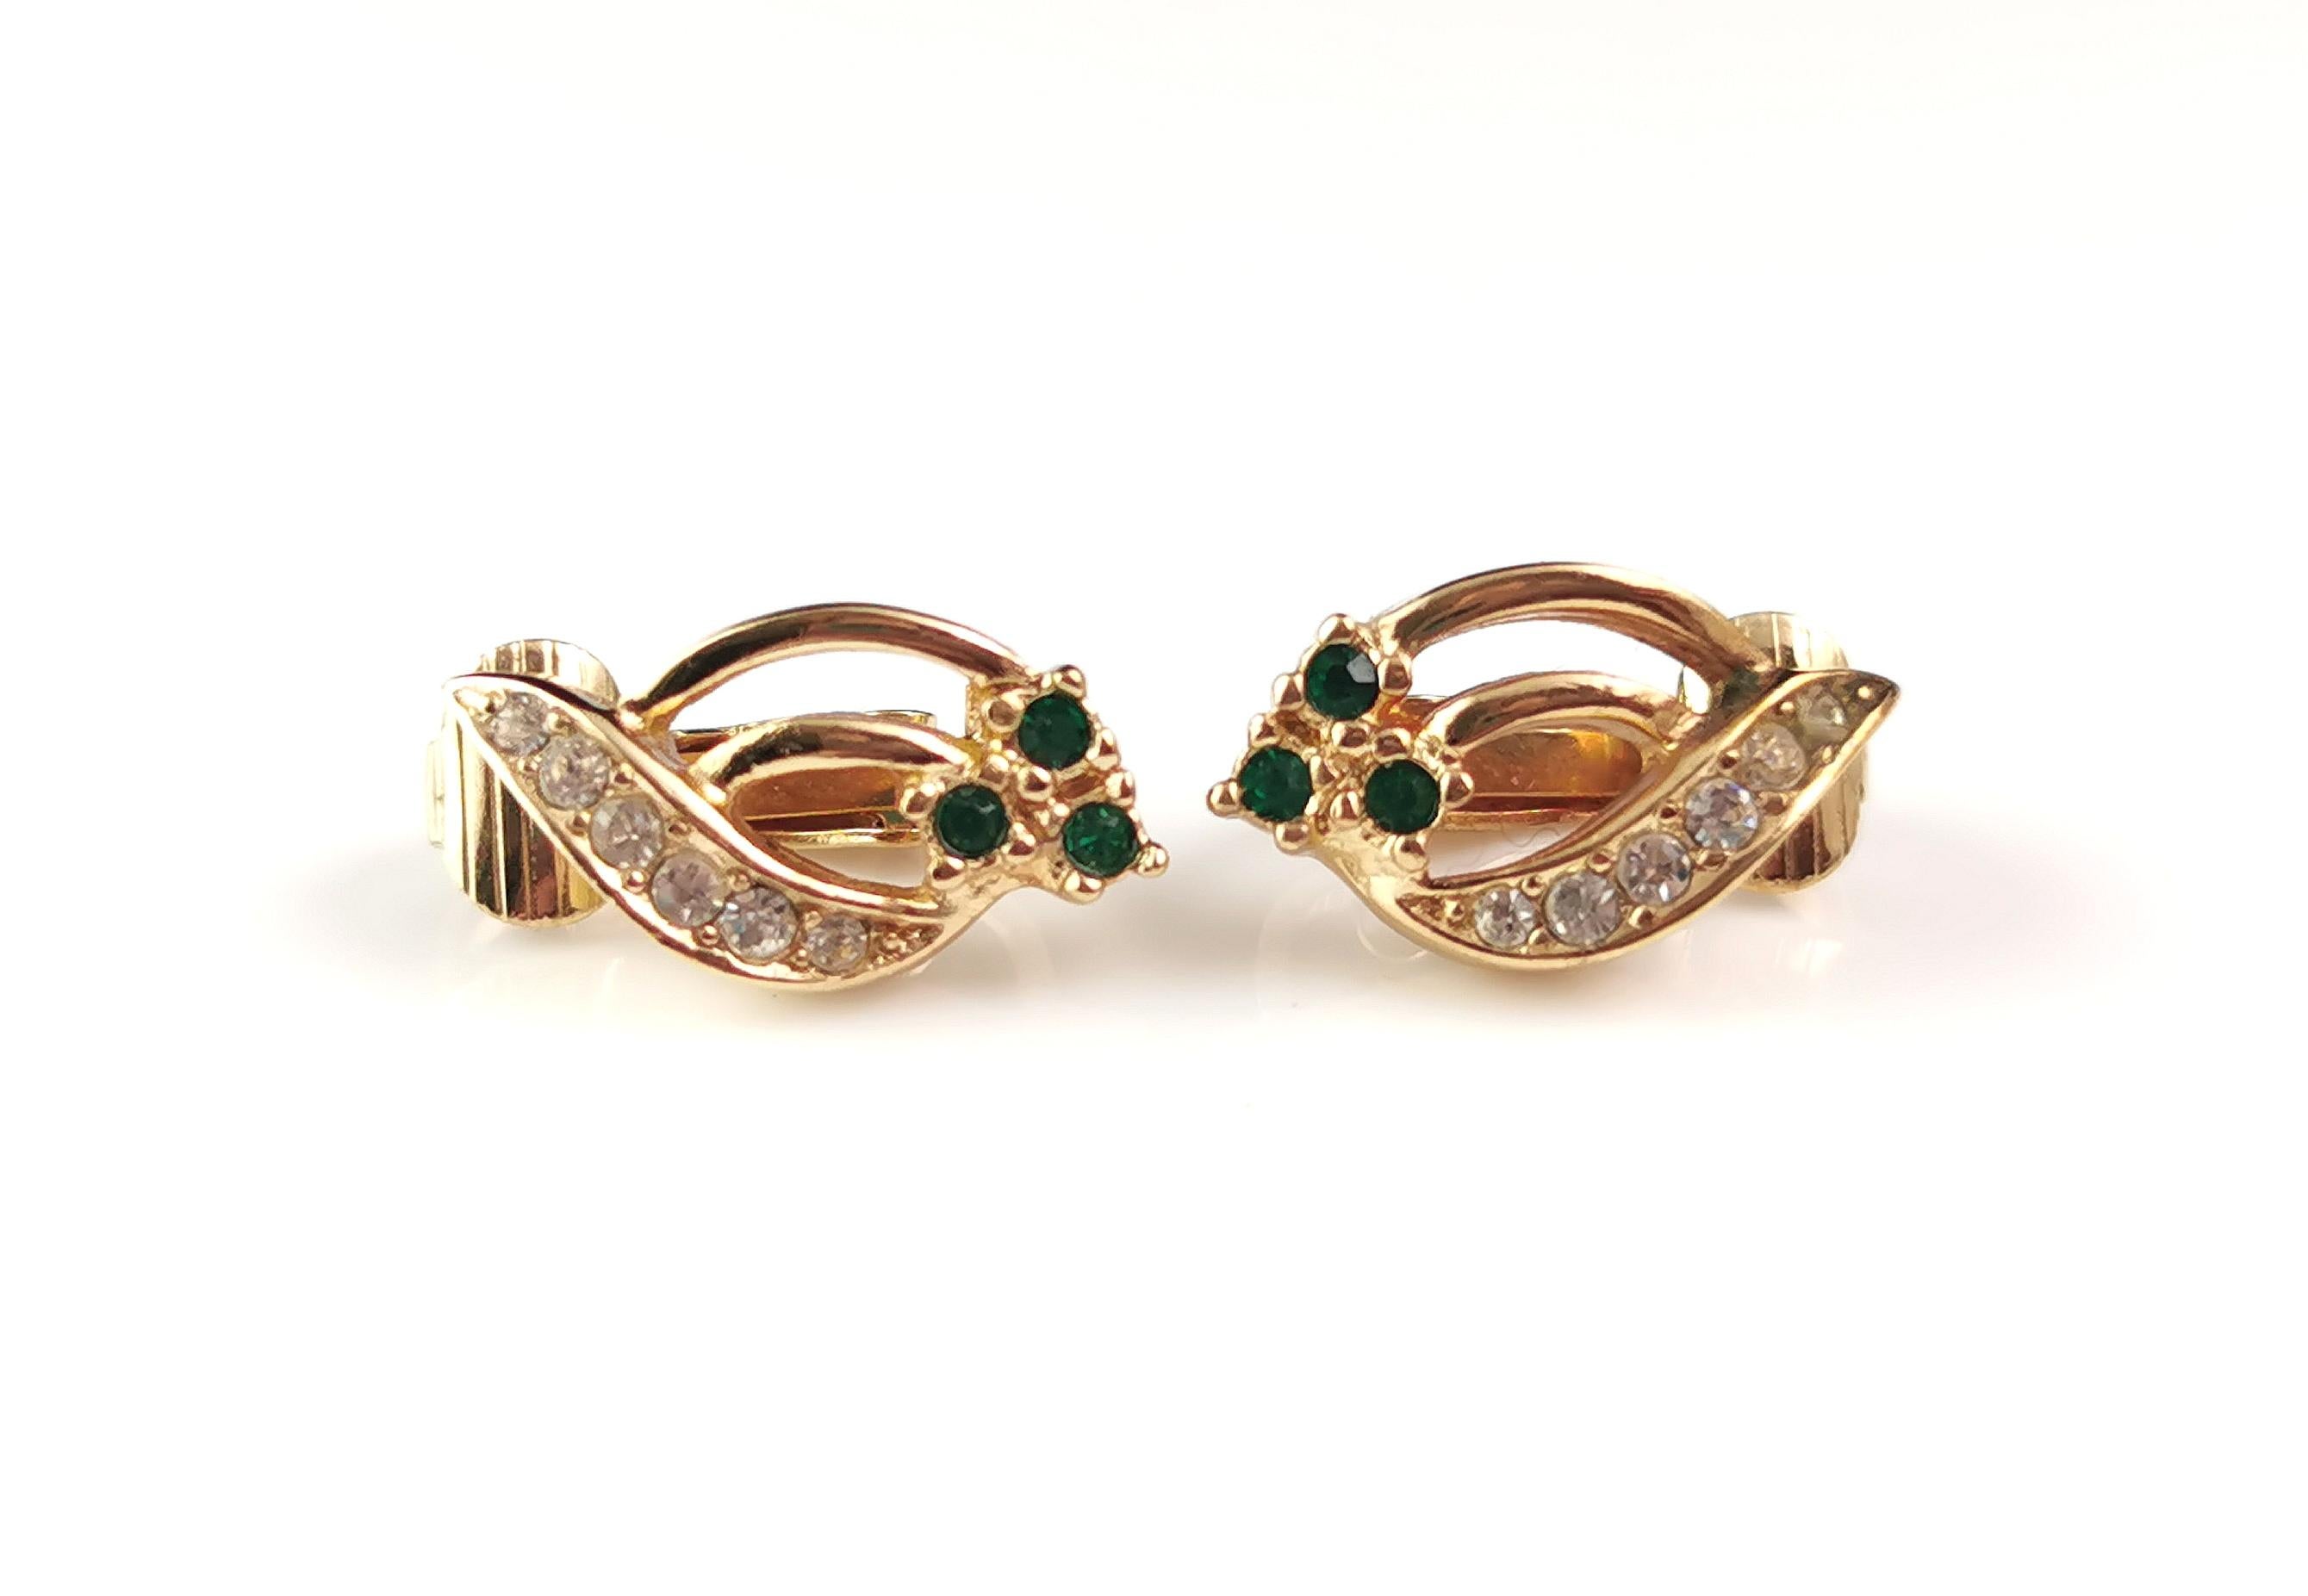 A fantastic pair of vintage Christian Dior clip on earrings.

A smaller pair of clip on earrings these are lighter weight so easy to wear for longer periods.

Designed as a small floral shamrock spray they are crafted in a gold tone metal with green